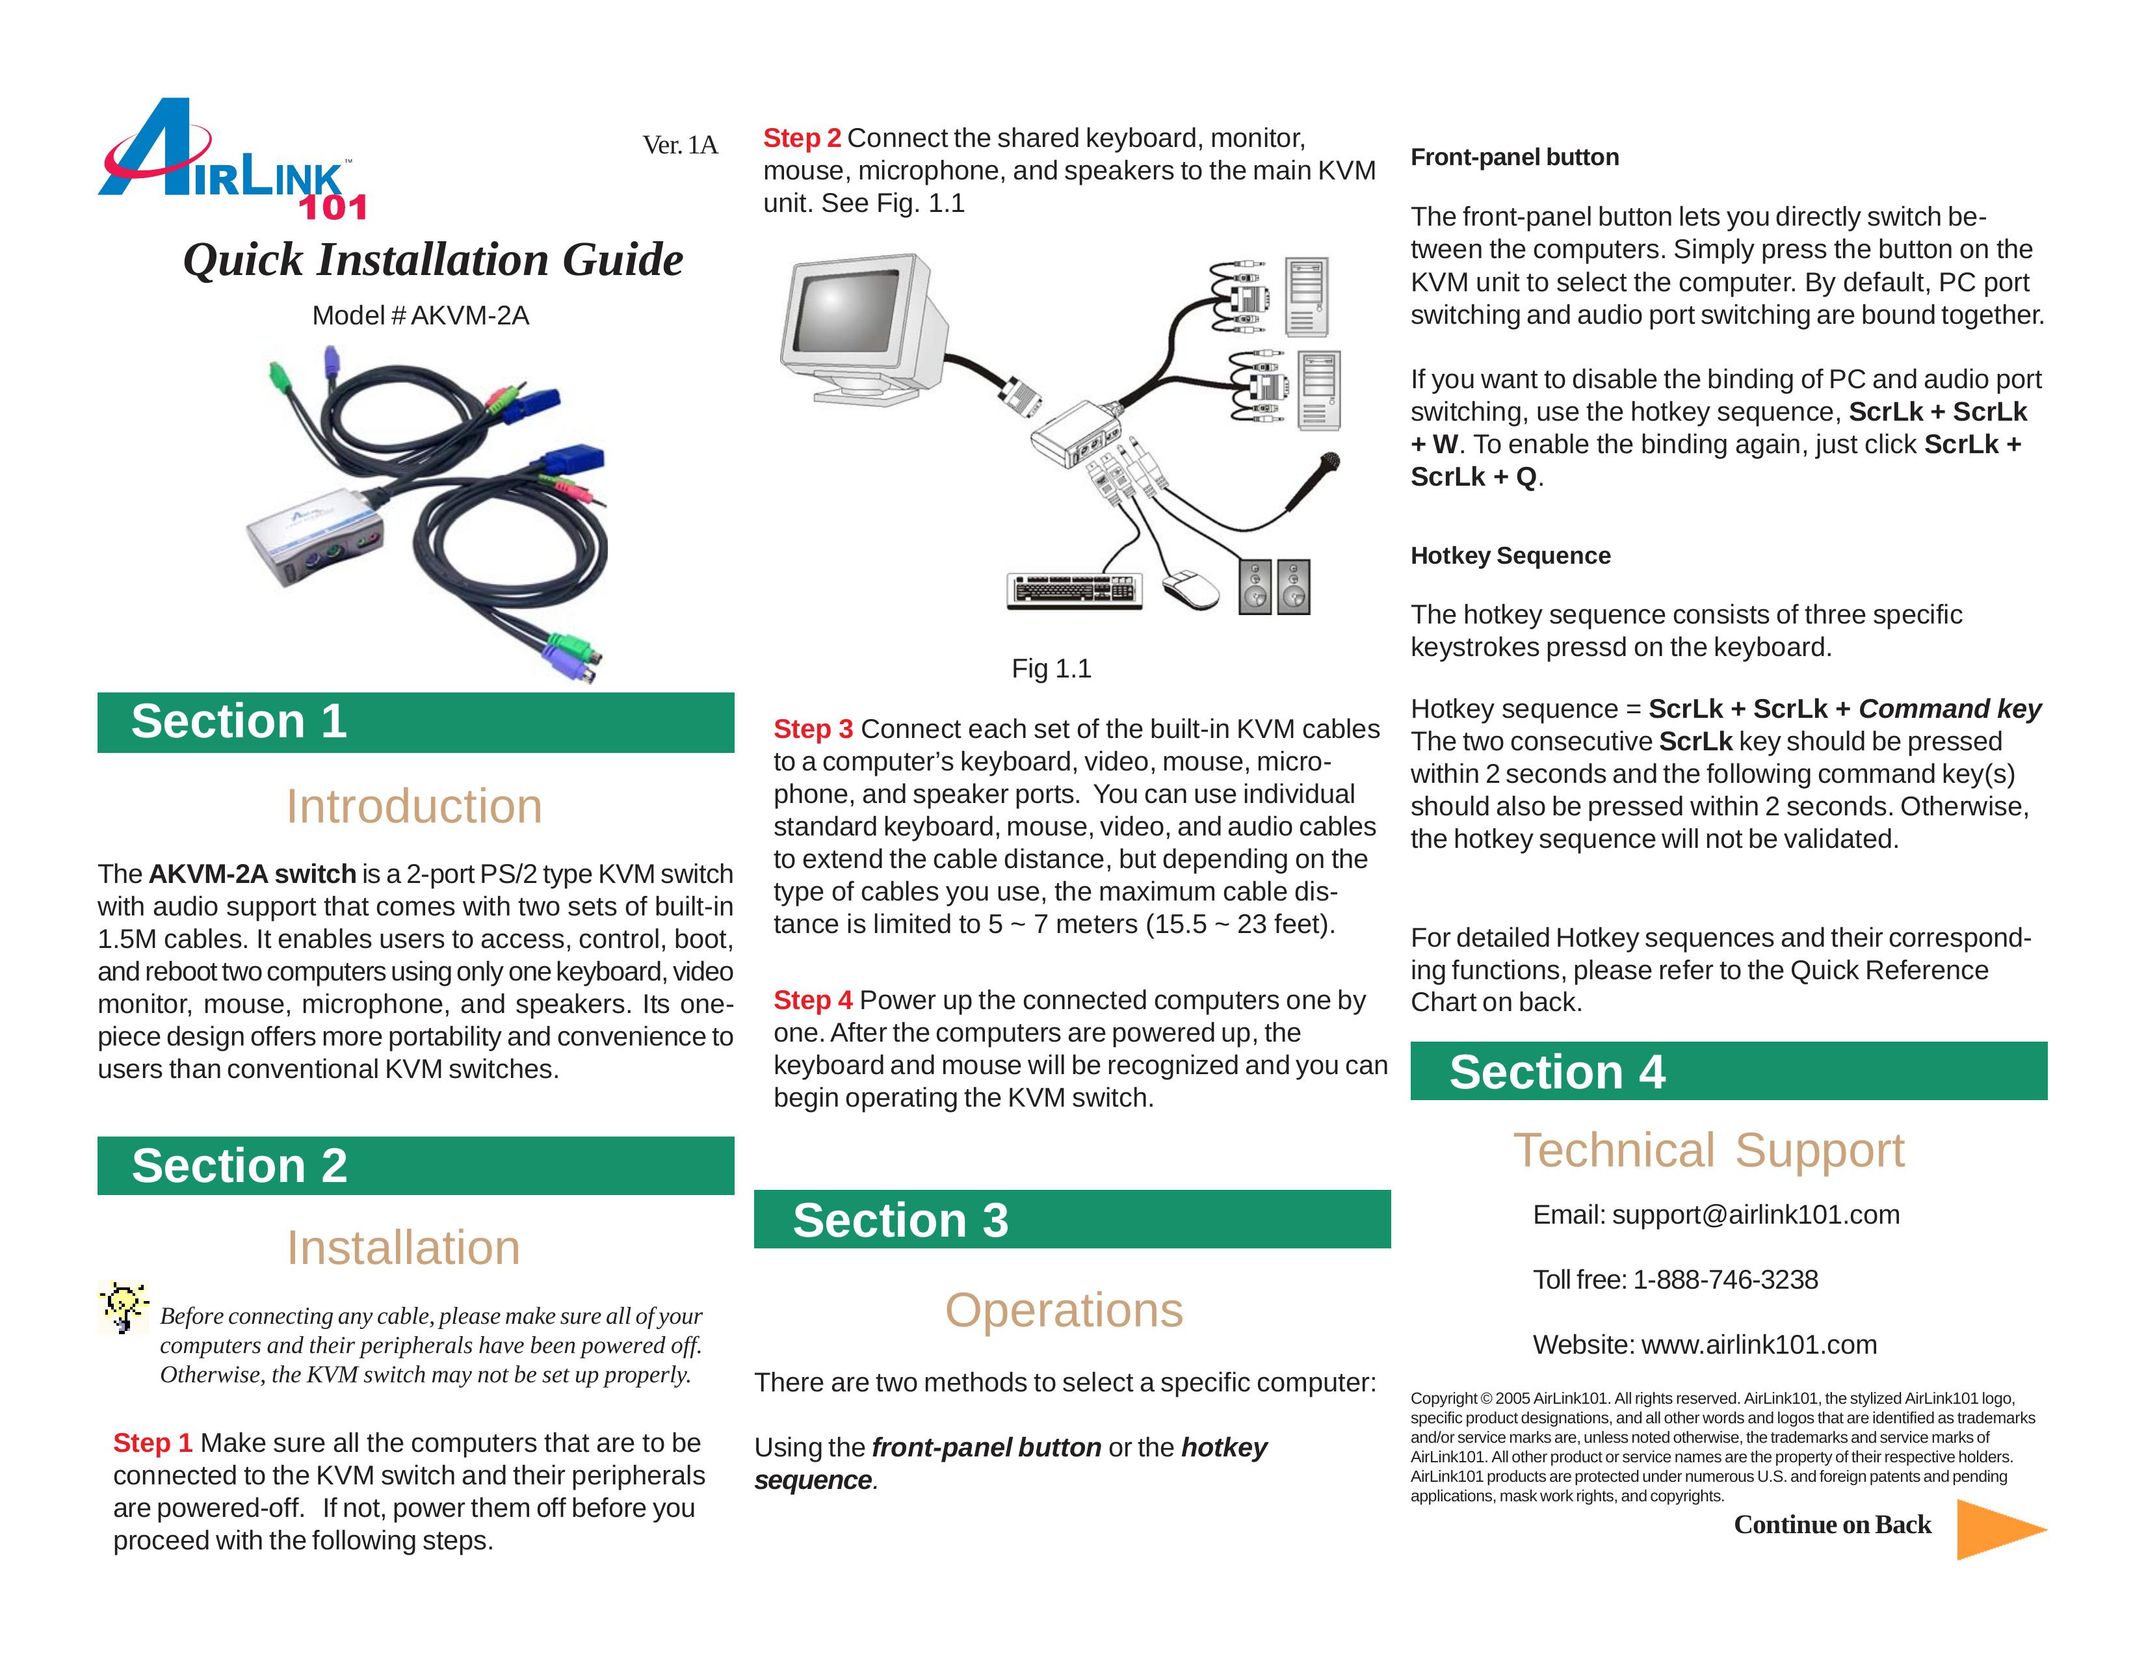 Airlink101 AKVM-2A Switch User Manual